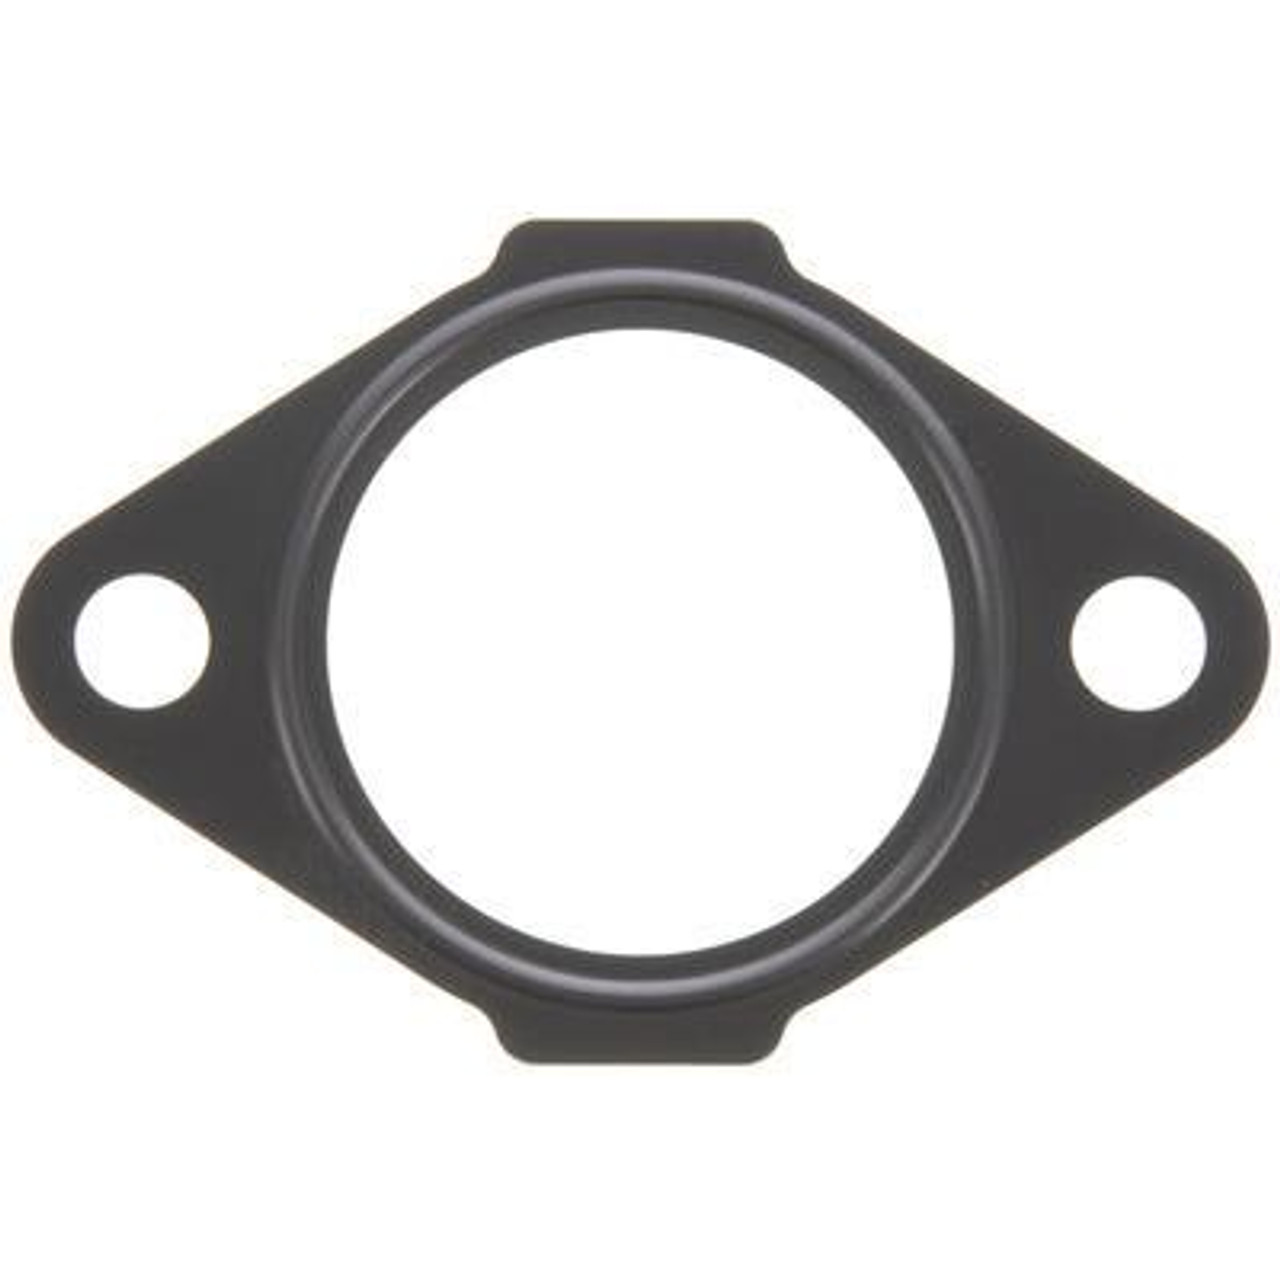 Mahle Water Pump Gasket 2001 to 2005 LB7/LLY Duramax (MCIC32062)-Main View